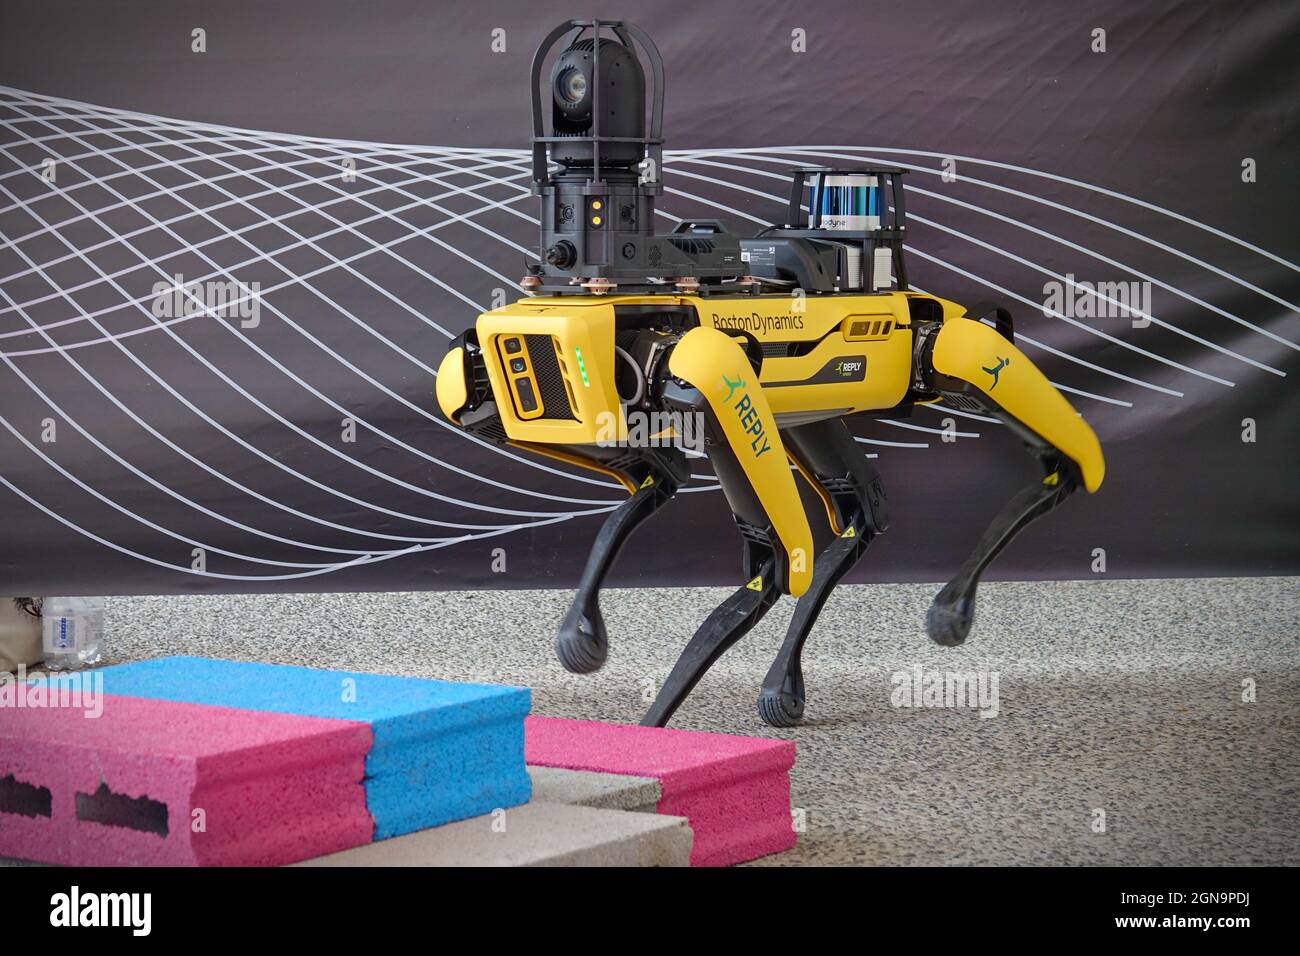 Yellow robot dog, suitable for industrial detection and remote operation. Mini robot guard Spot. Turin, Italy - September 2021 Stock Photo